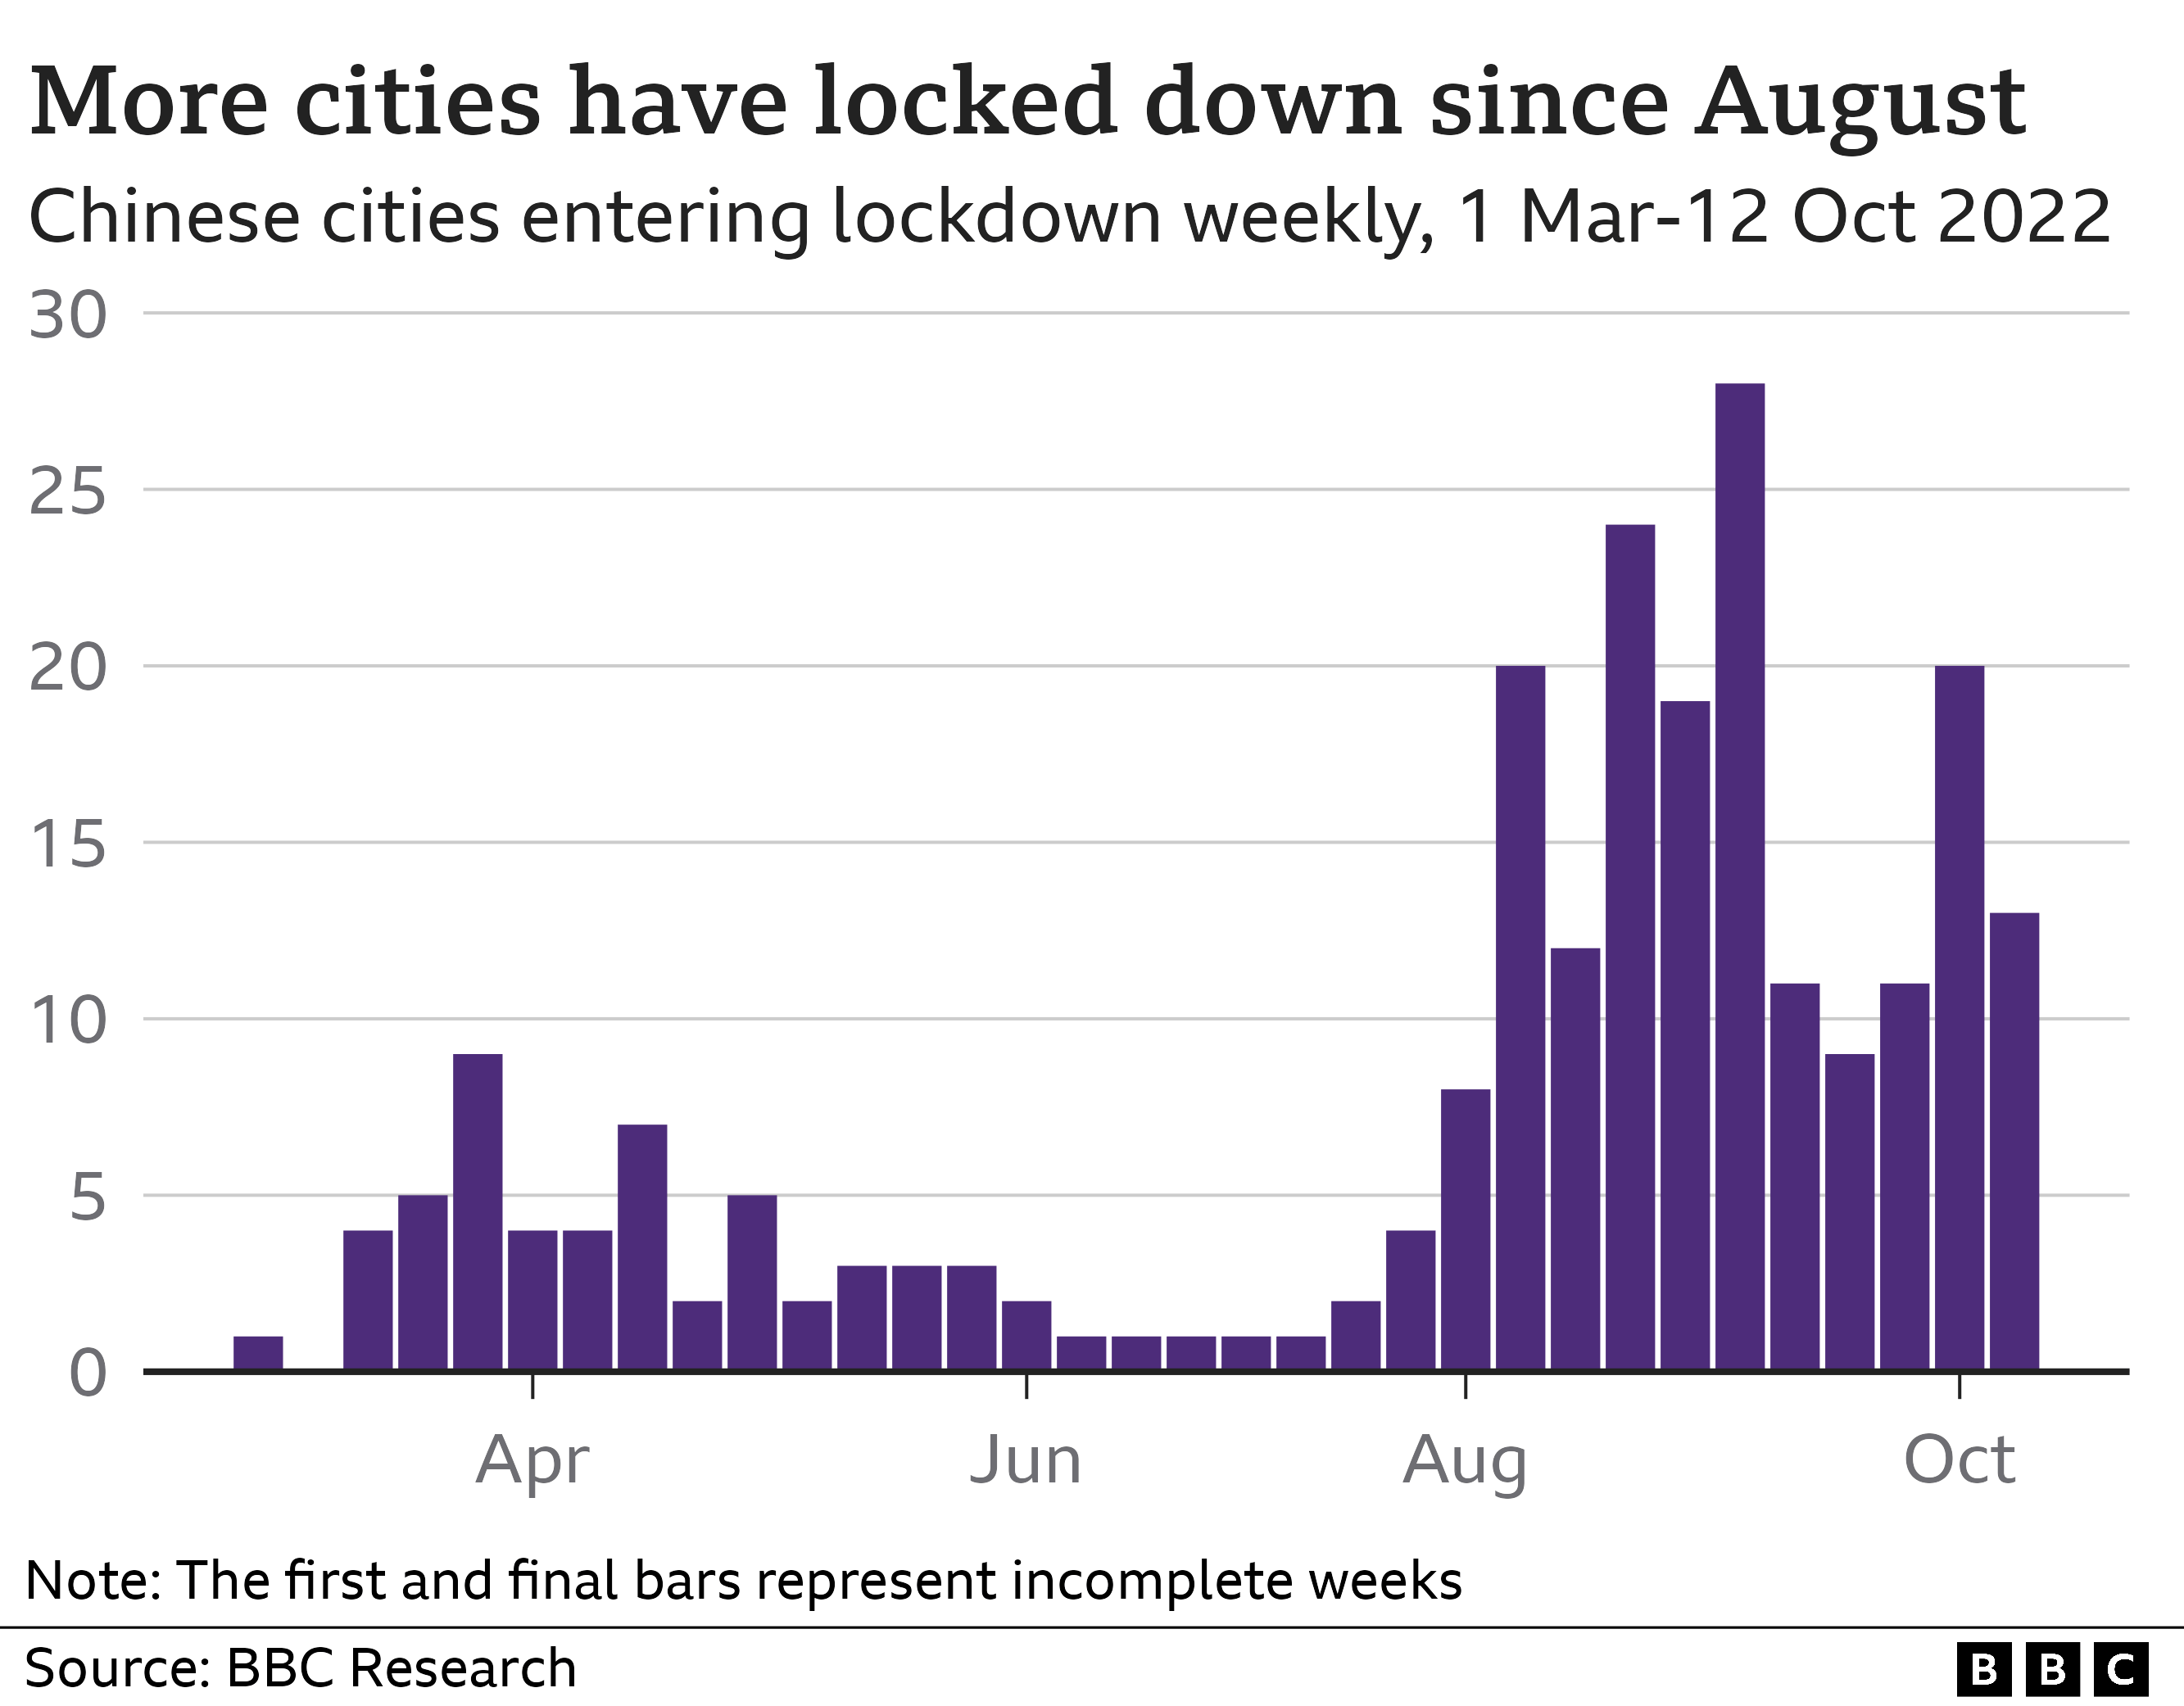 Chart showing the number of cities in mainland China that have entered lockdown each week between 1 March and 12 October 2022. There has been a measurable increase in city lockdowns since August.